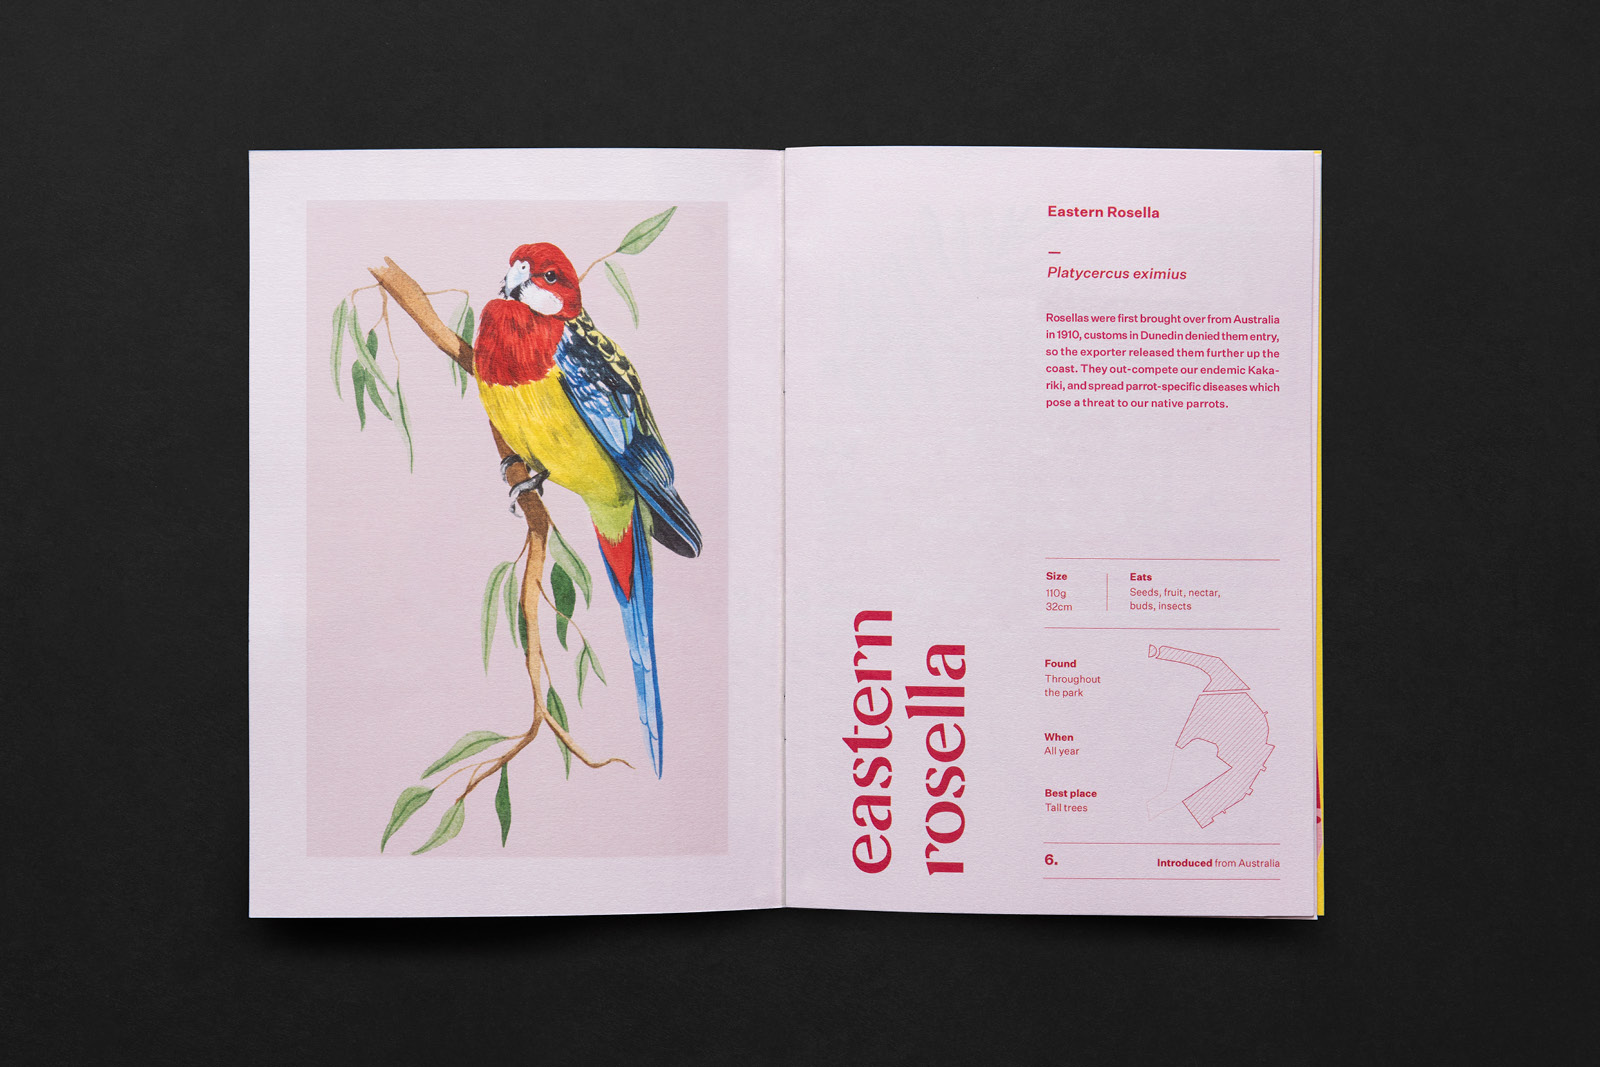 Open pages with illustration and information about the Eastern Rosella